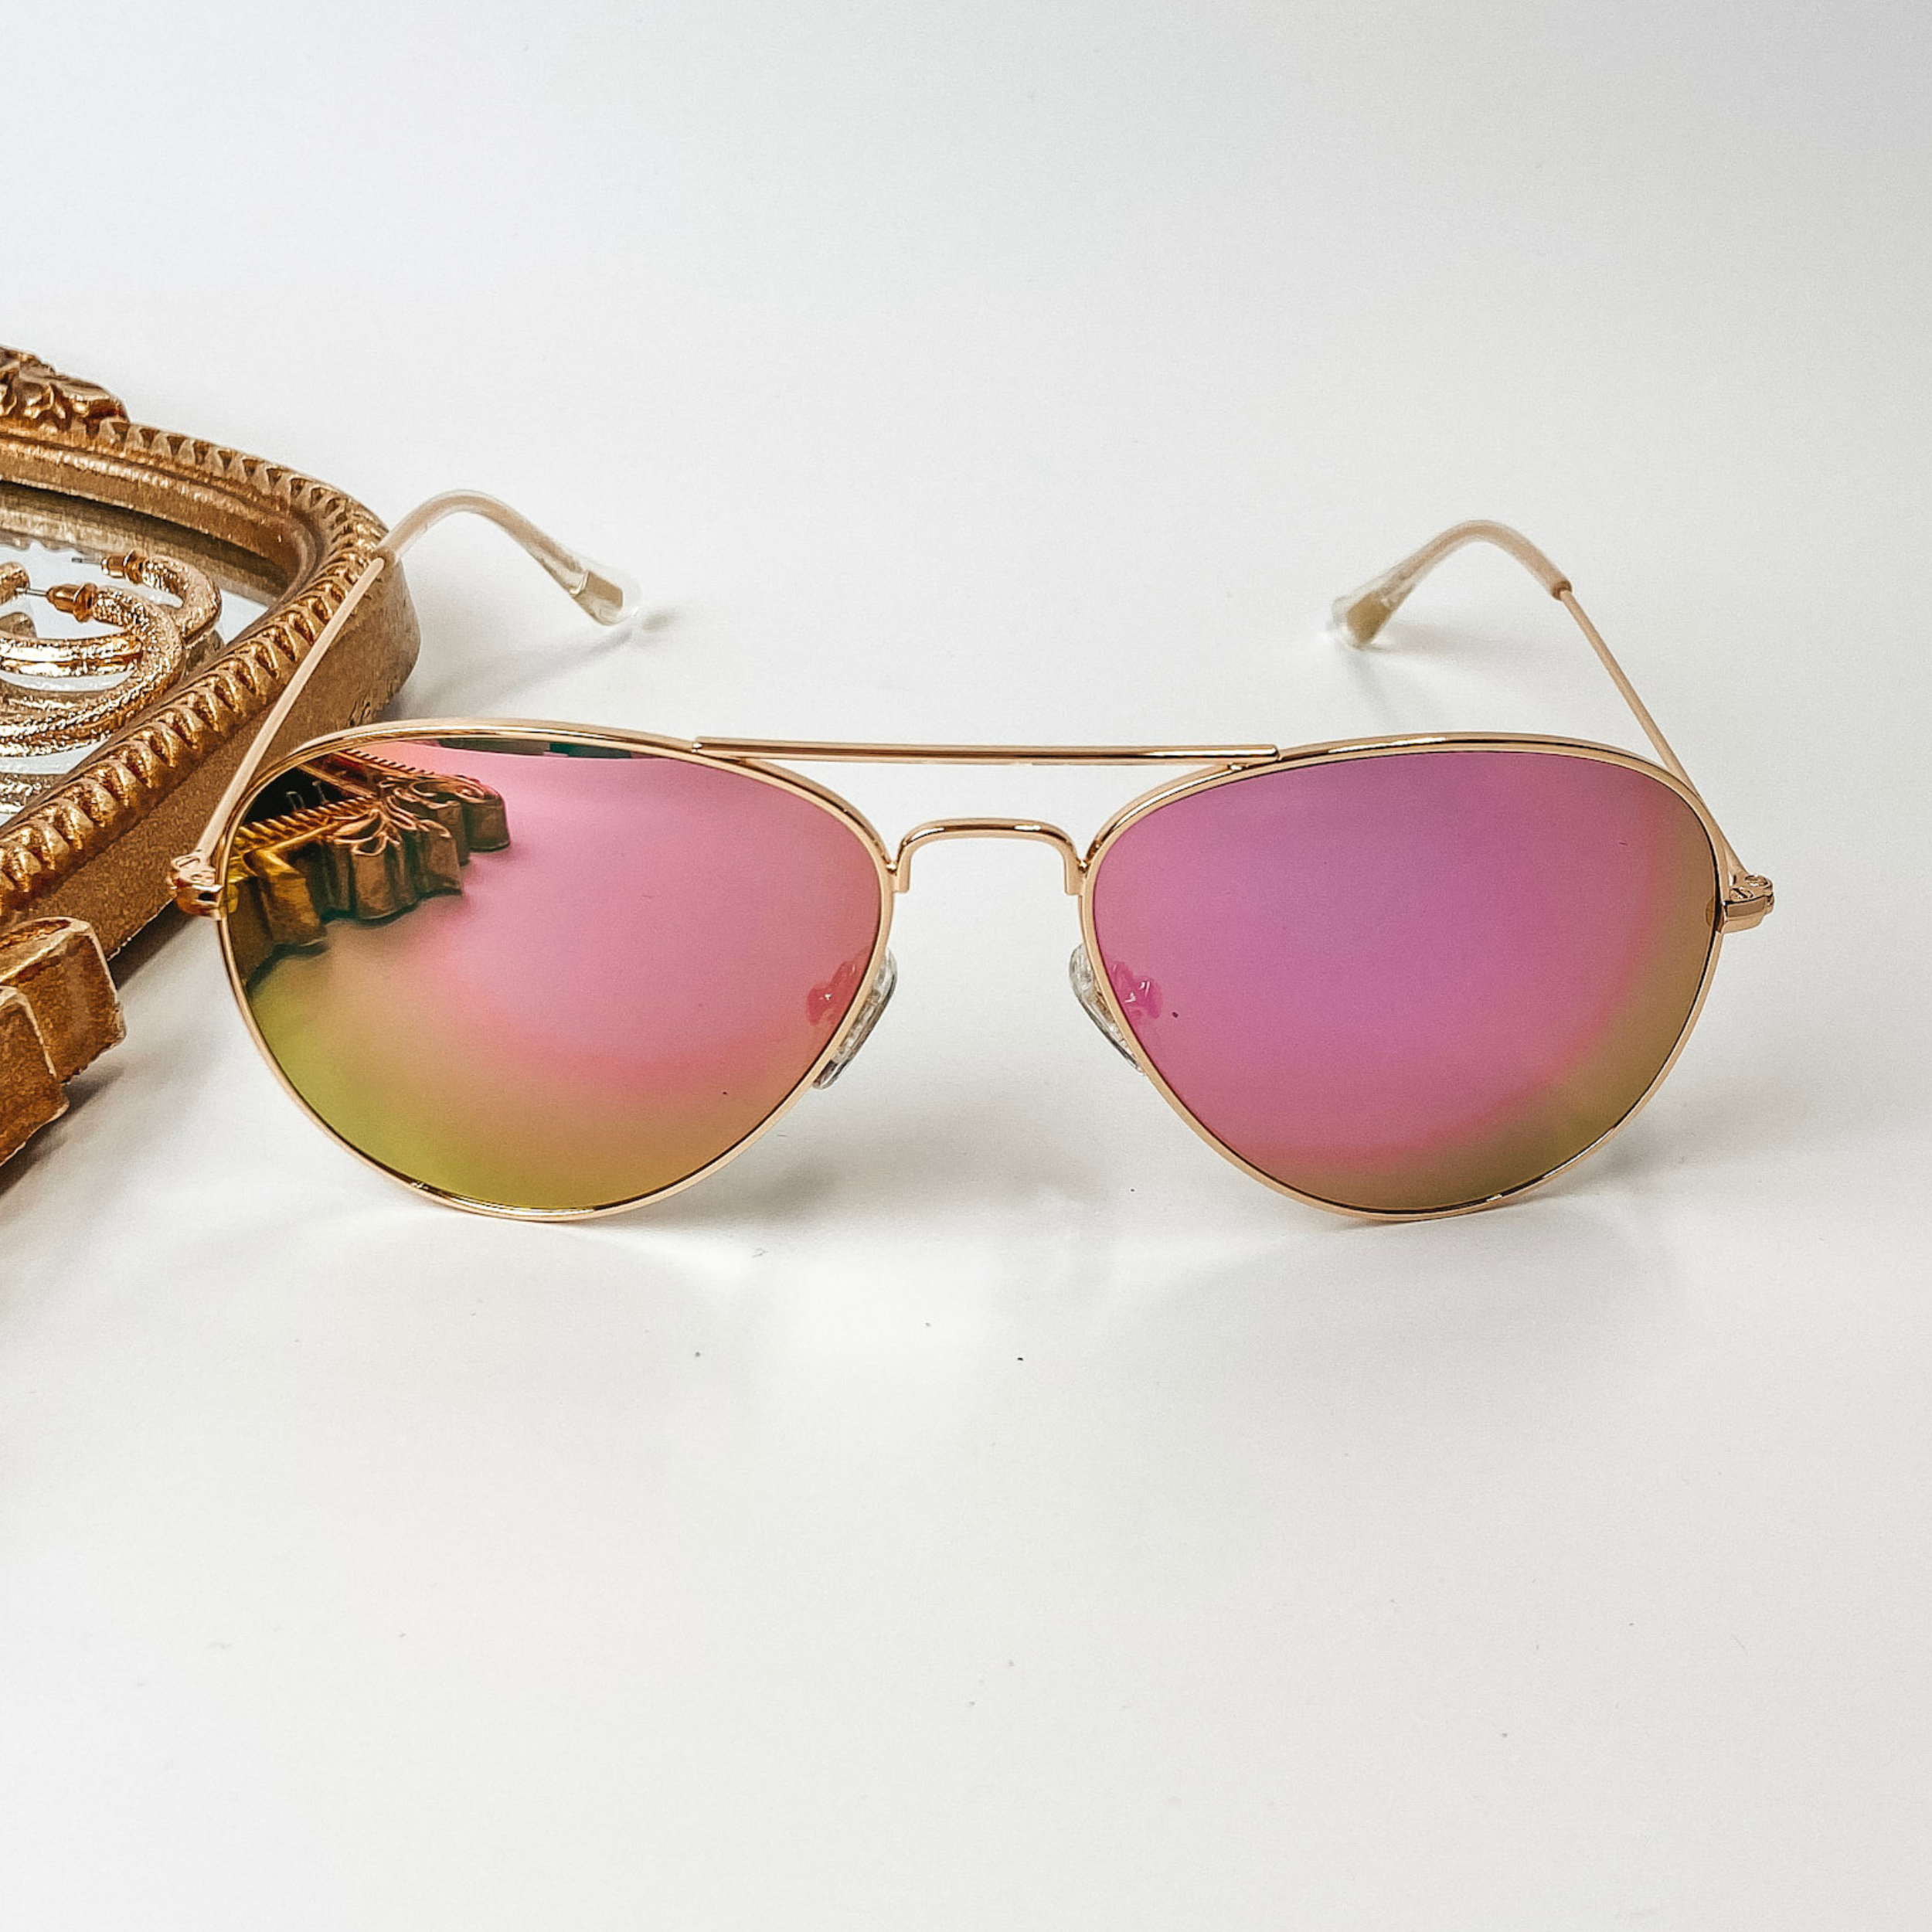  A pair of aviator style sunglasses with pink mirror lenses and gold tone frames. These sunglasses are pictured on a white background with gold jewelry.